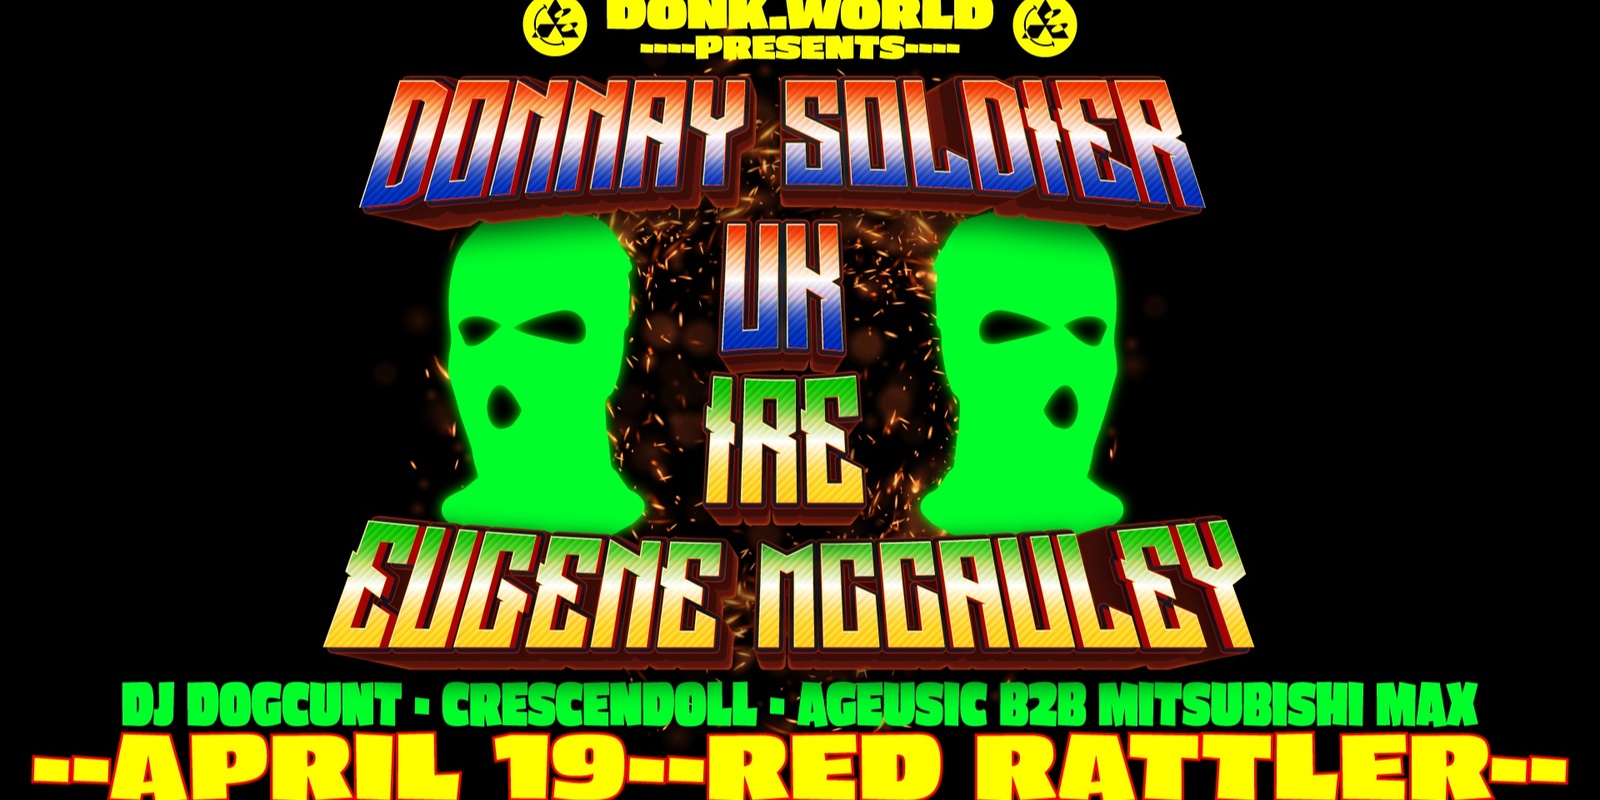 Banner image for DONK.WORLD PRESENT: DONNAY SOLDIER (UK) & EUGENE MCCAULEY (IRE) [SYD DATE]